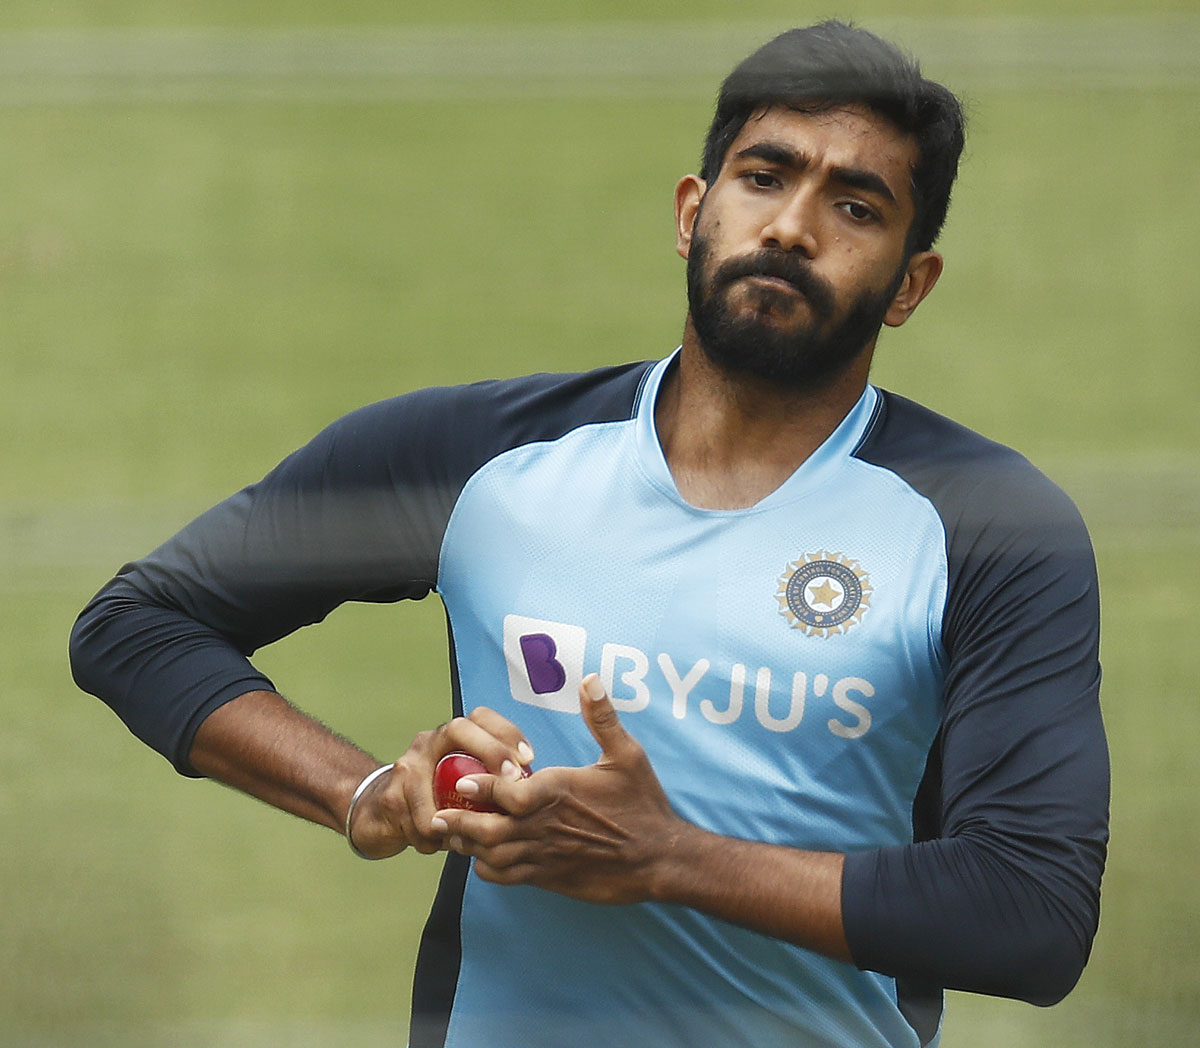 It will be an honour to captain India: Bumrah